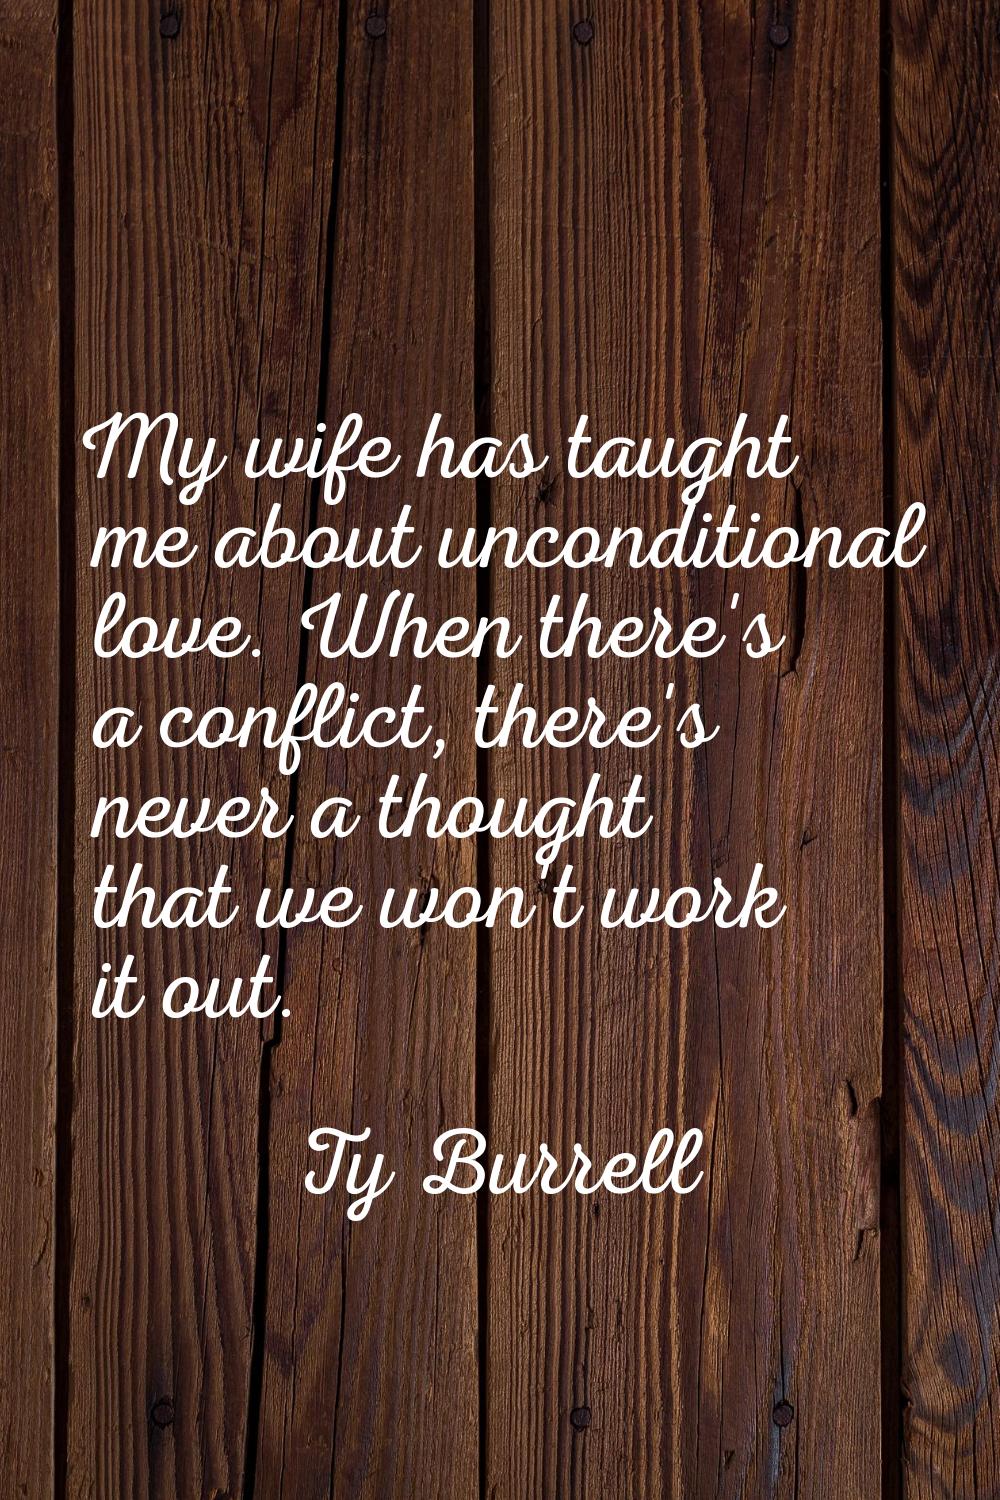 My wife has taught me about unconditional love. When there's a conflict, there's never a thought th